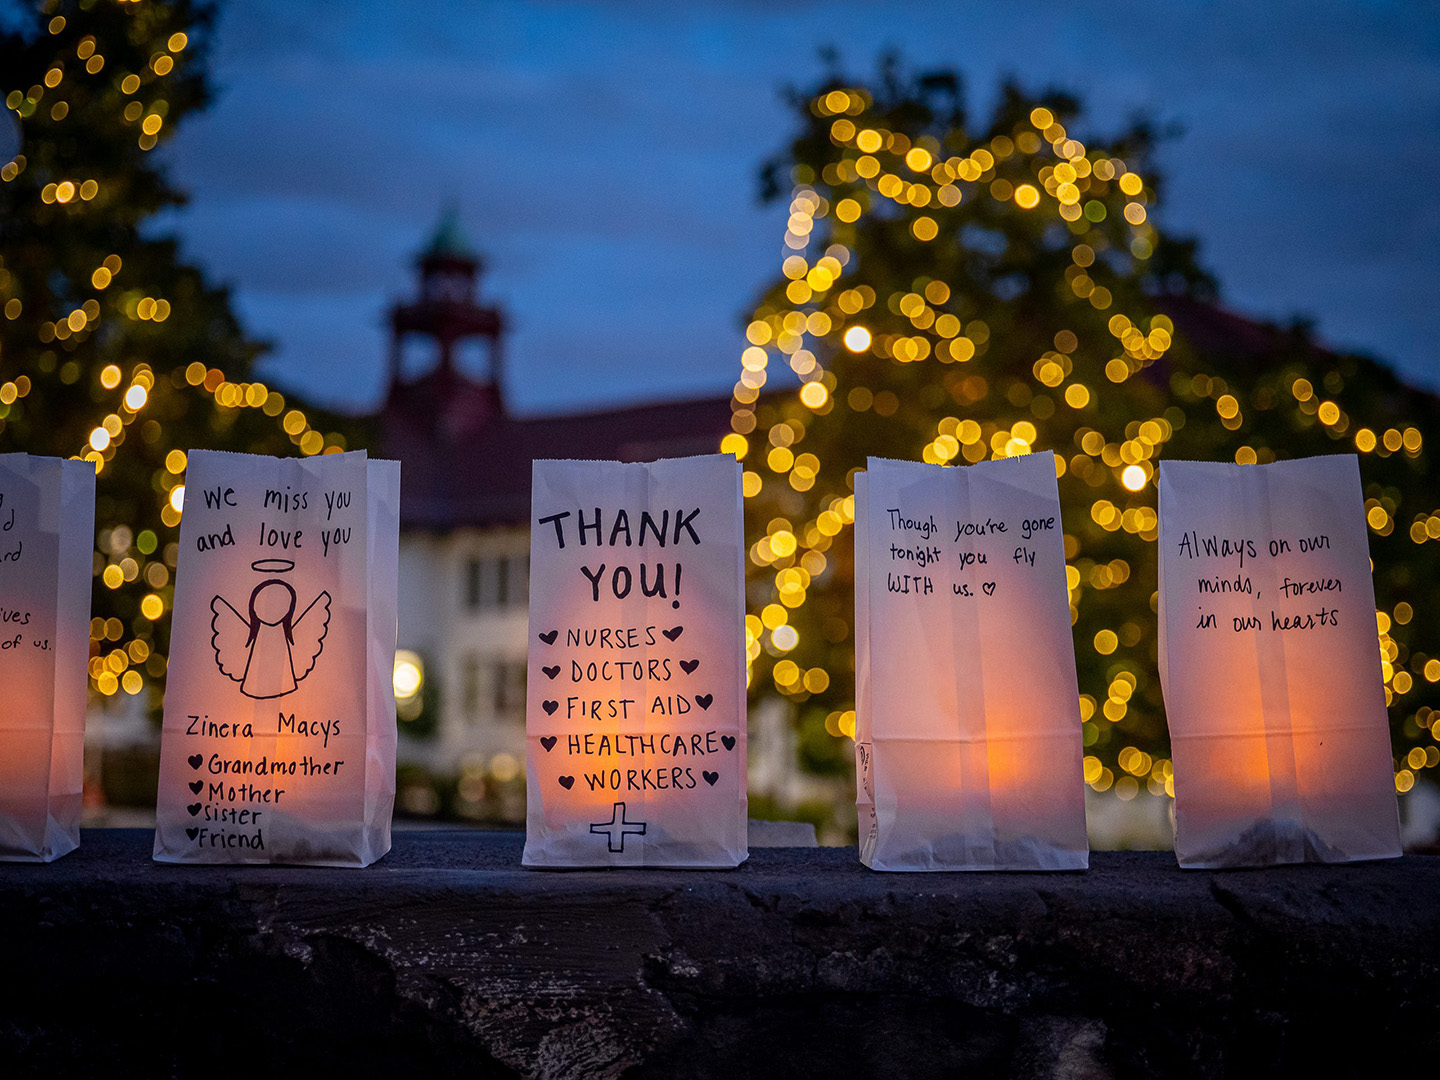 Lighted luminaria at dusk with messages by the MSU community